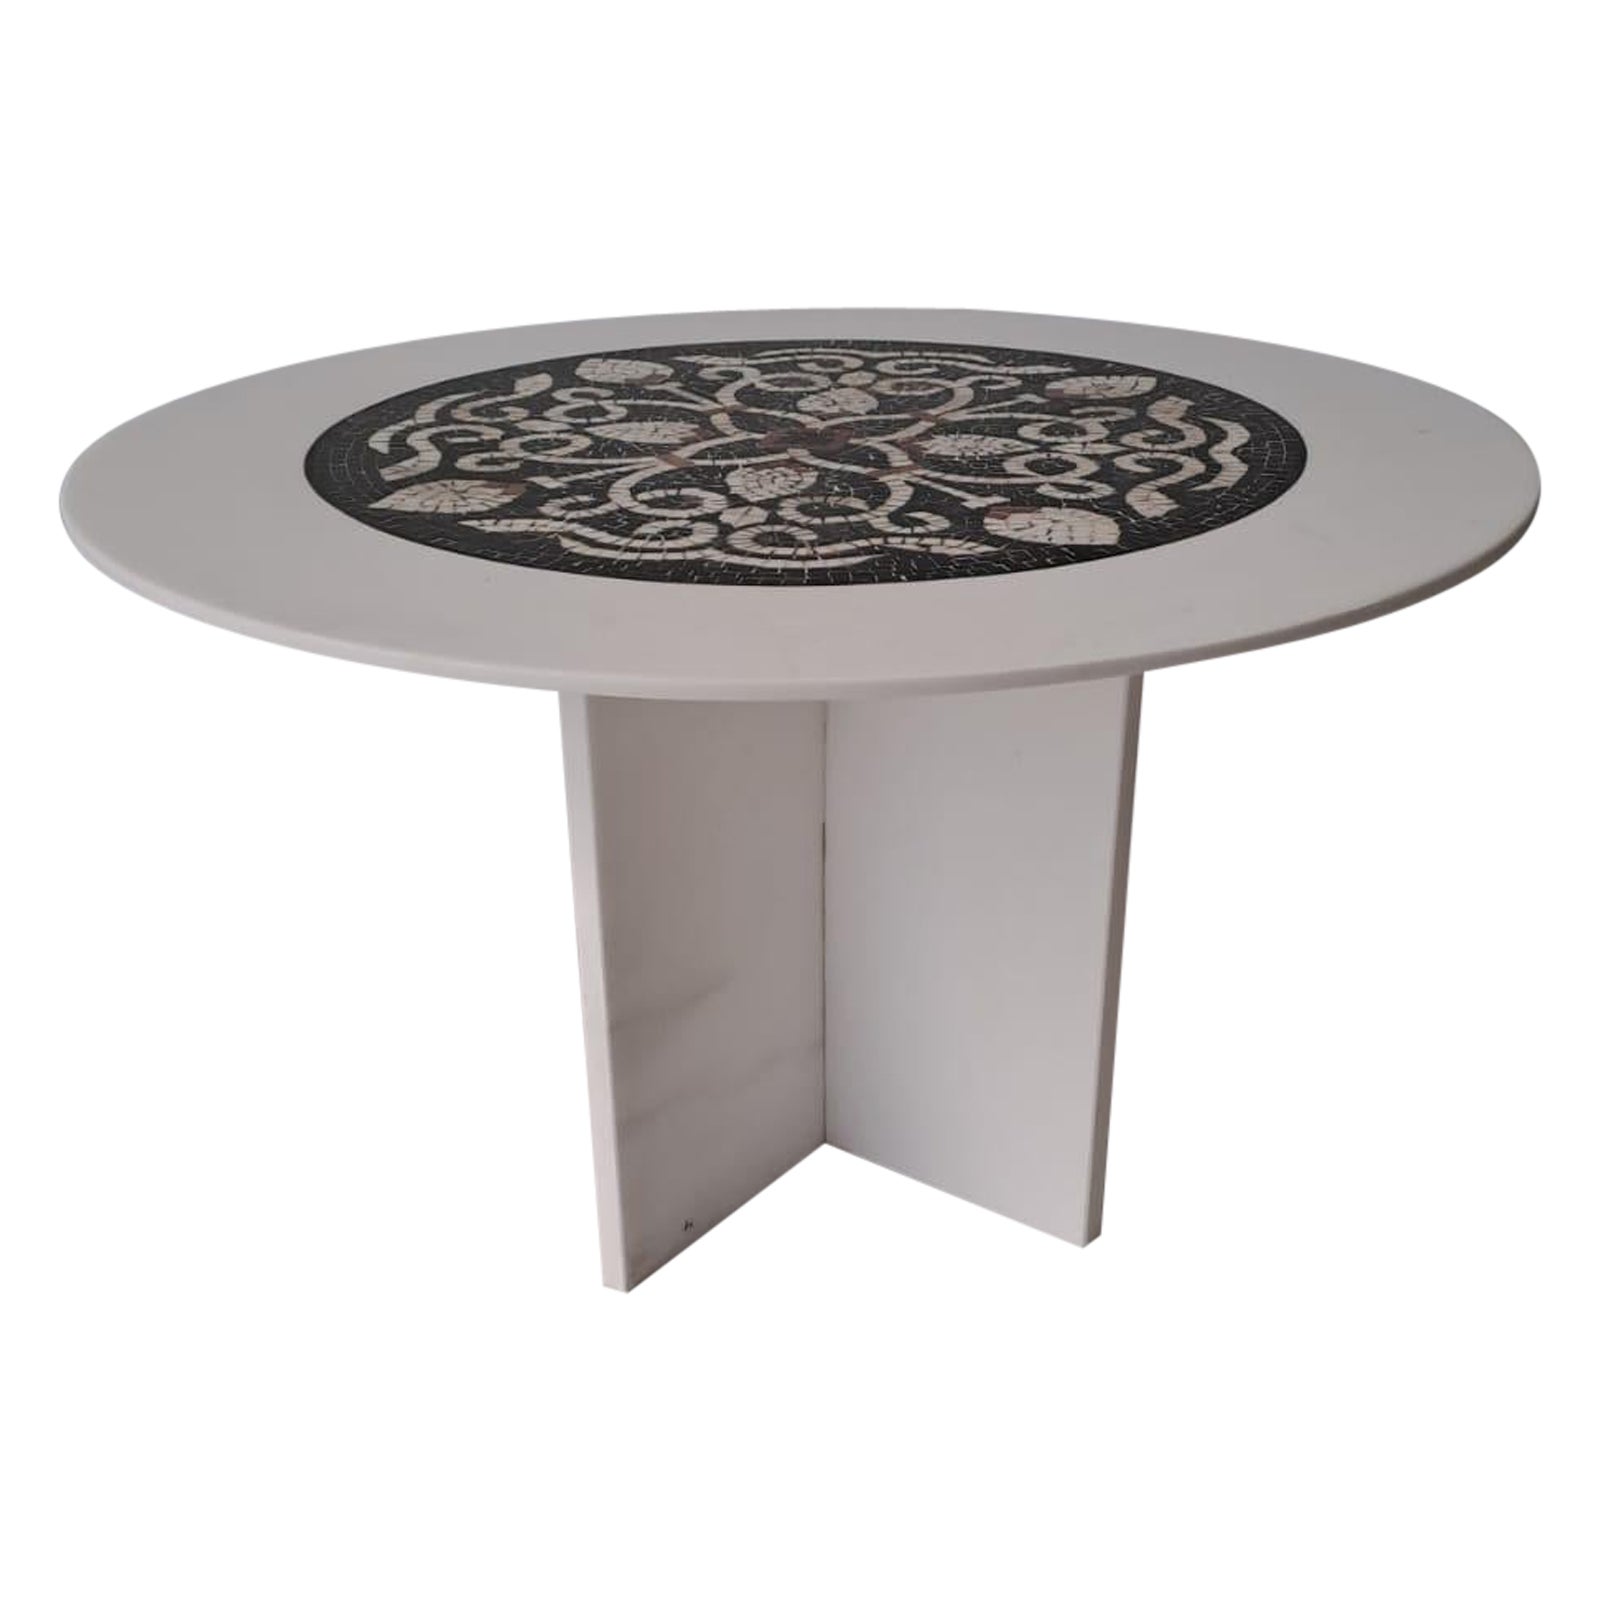 The Maze Coffee Table is made of the exquisite Greek Thasos marble and a Marble Mosaic top. This coffee table is a luxurious and eye-catching piece of furniture that combines the timeless beauty of natural stone with exceptional craftsmanship. This